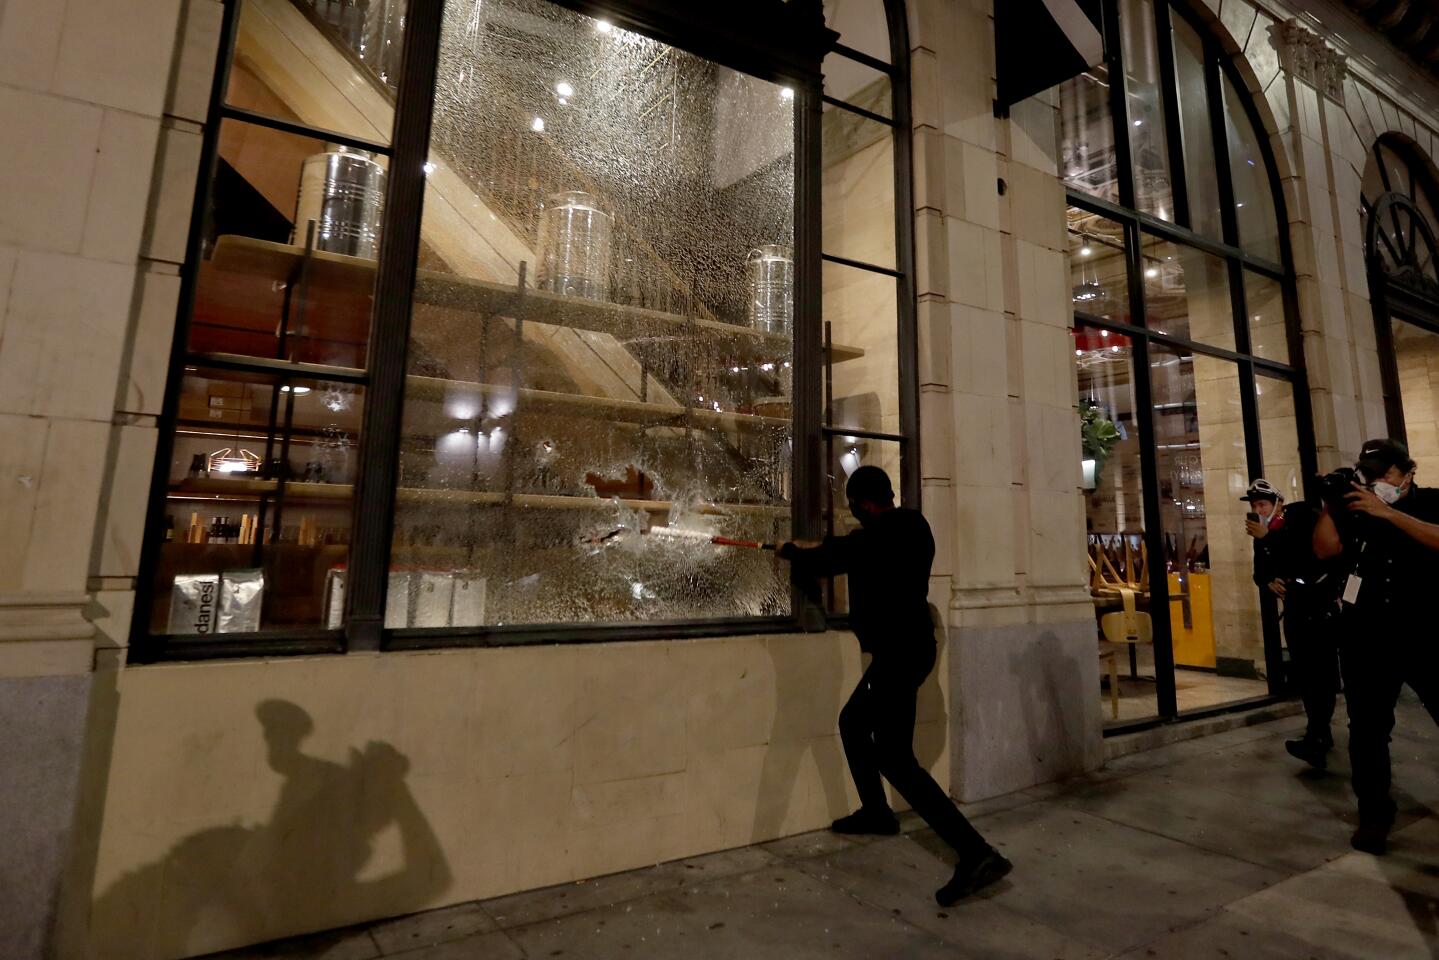 A man smashes the window of a business in downtown Los Angeles